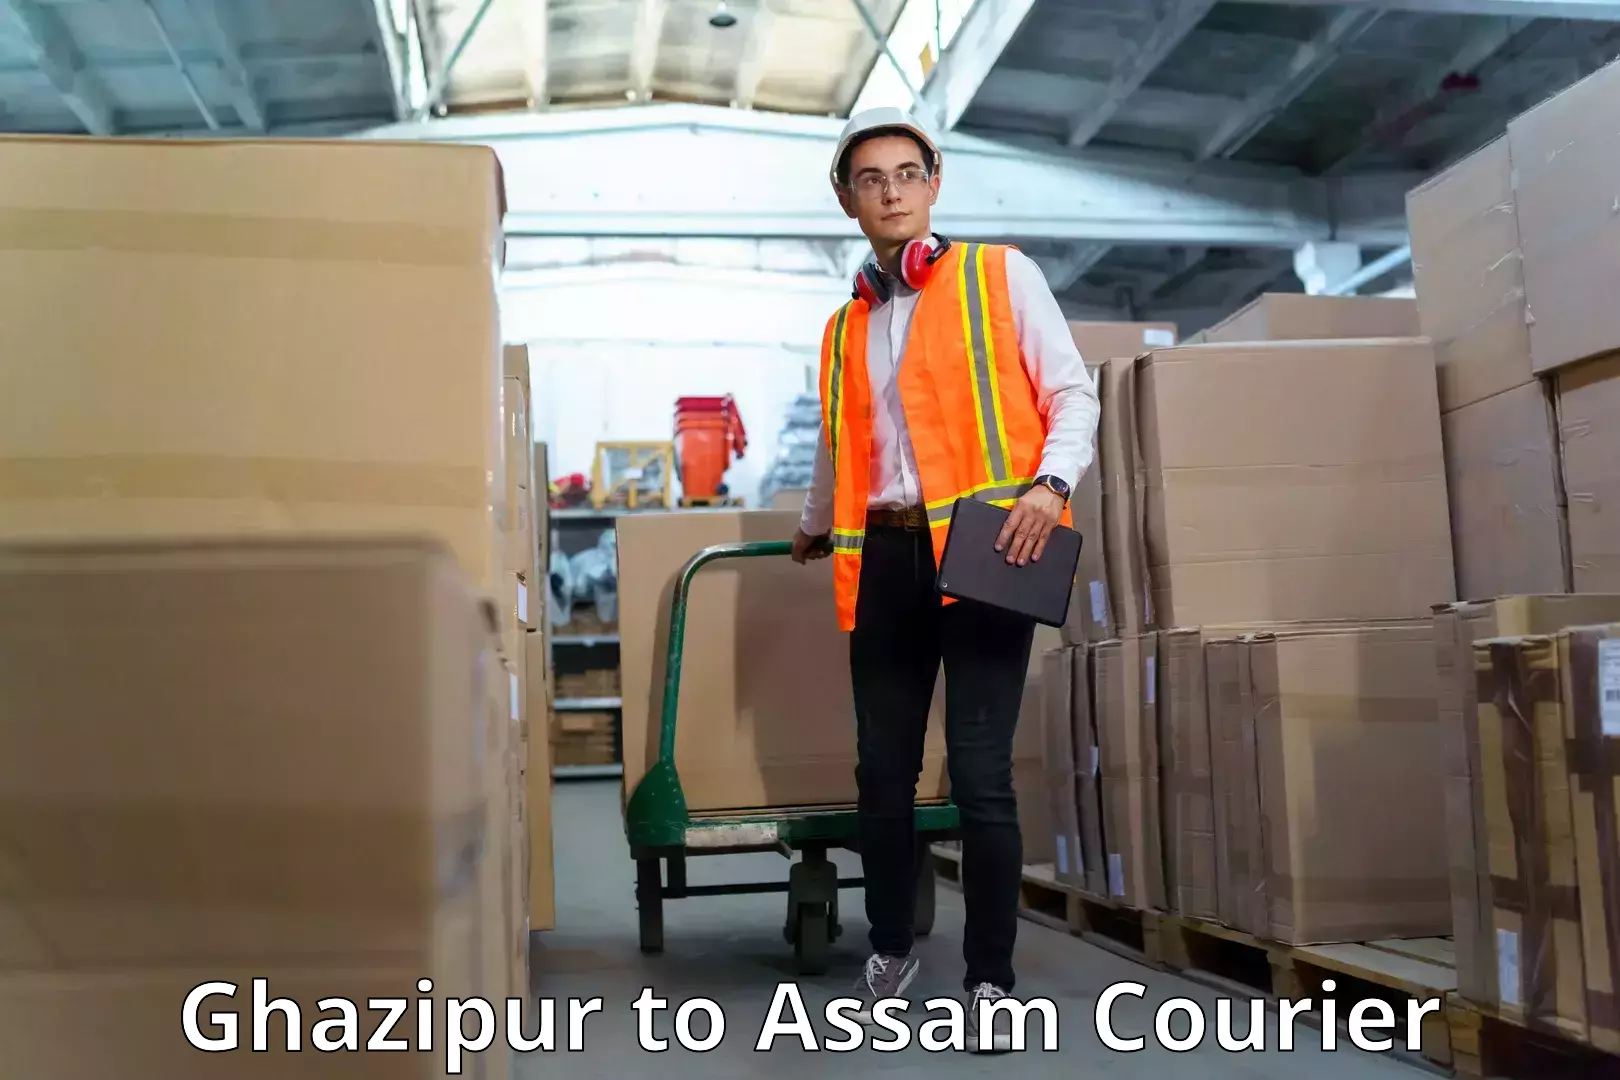 User-friendly delivery service Ghazipur to Assam